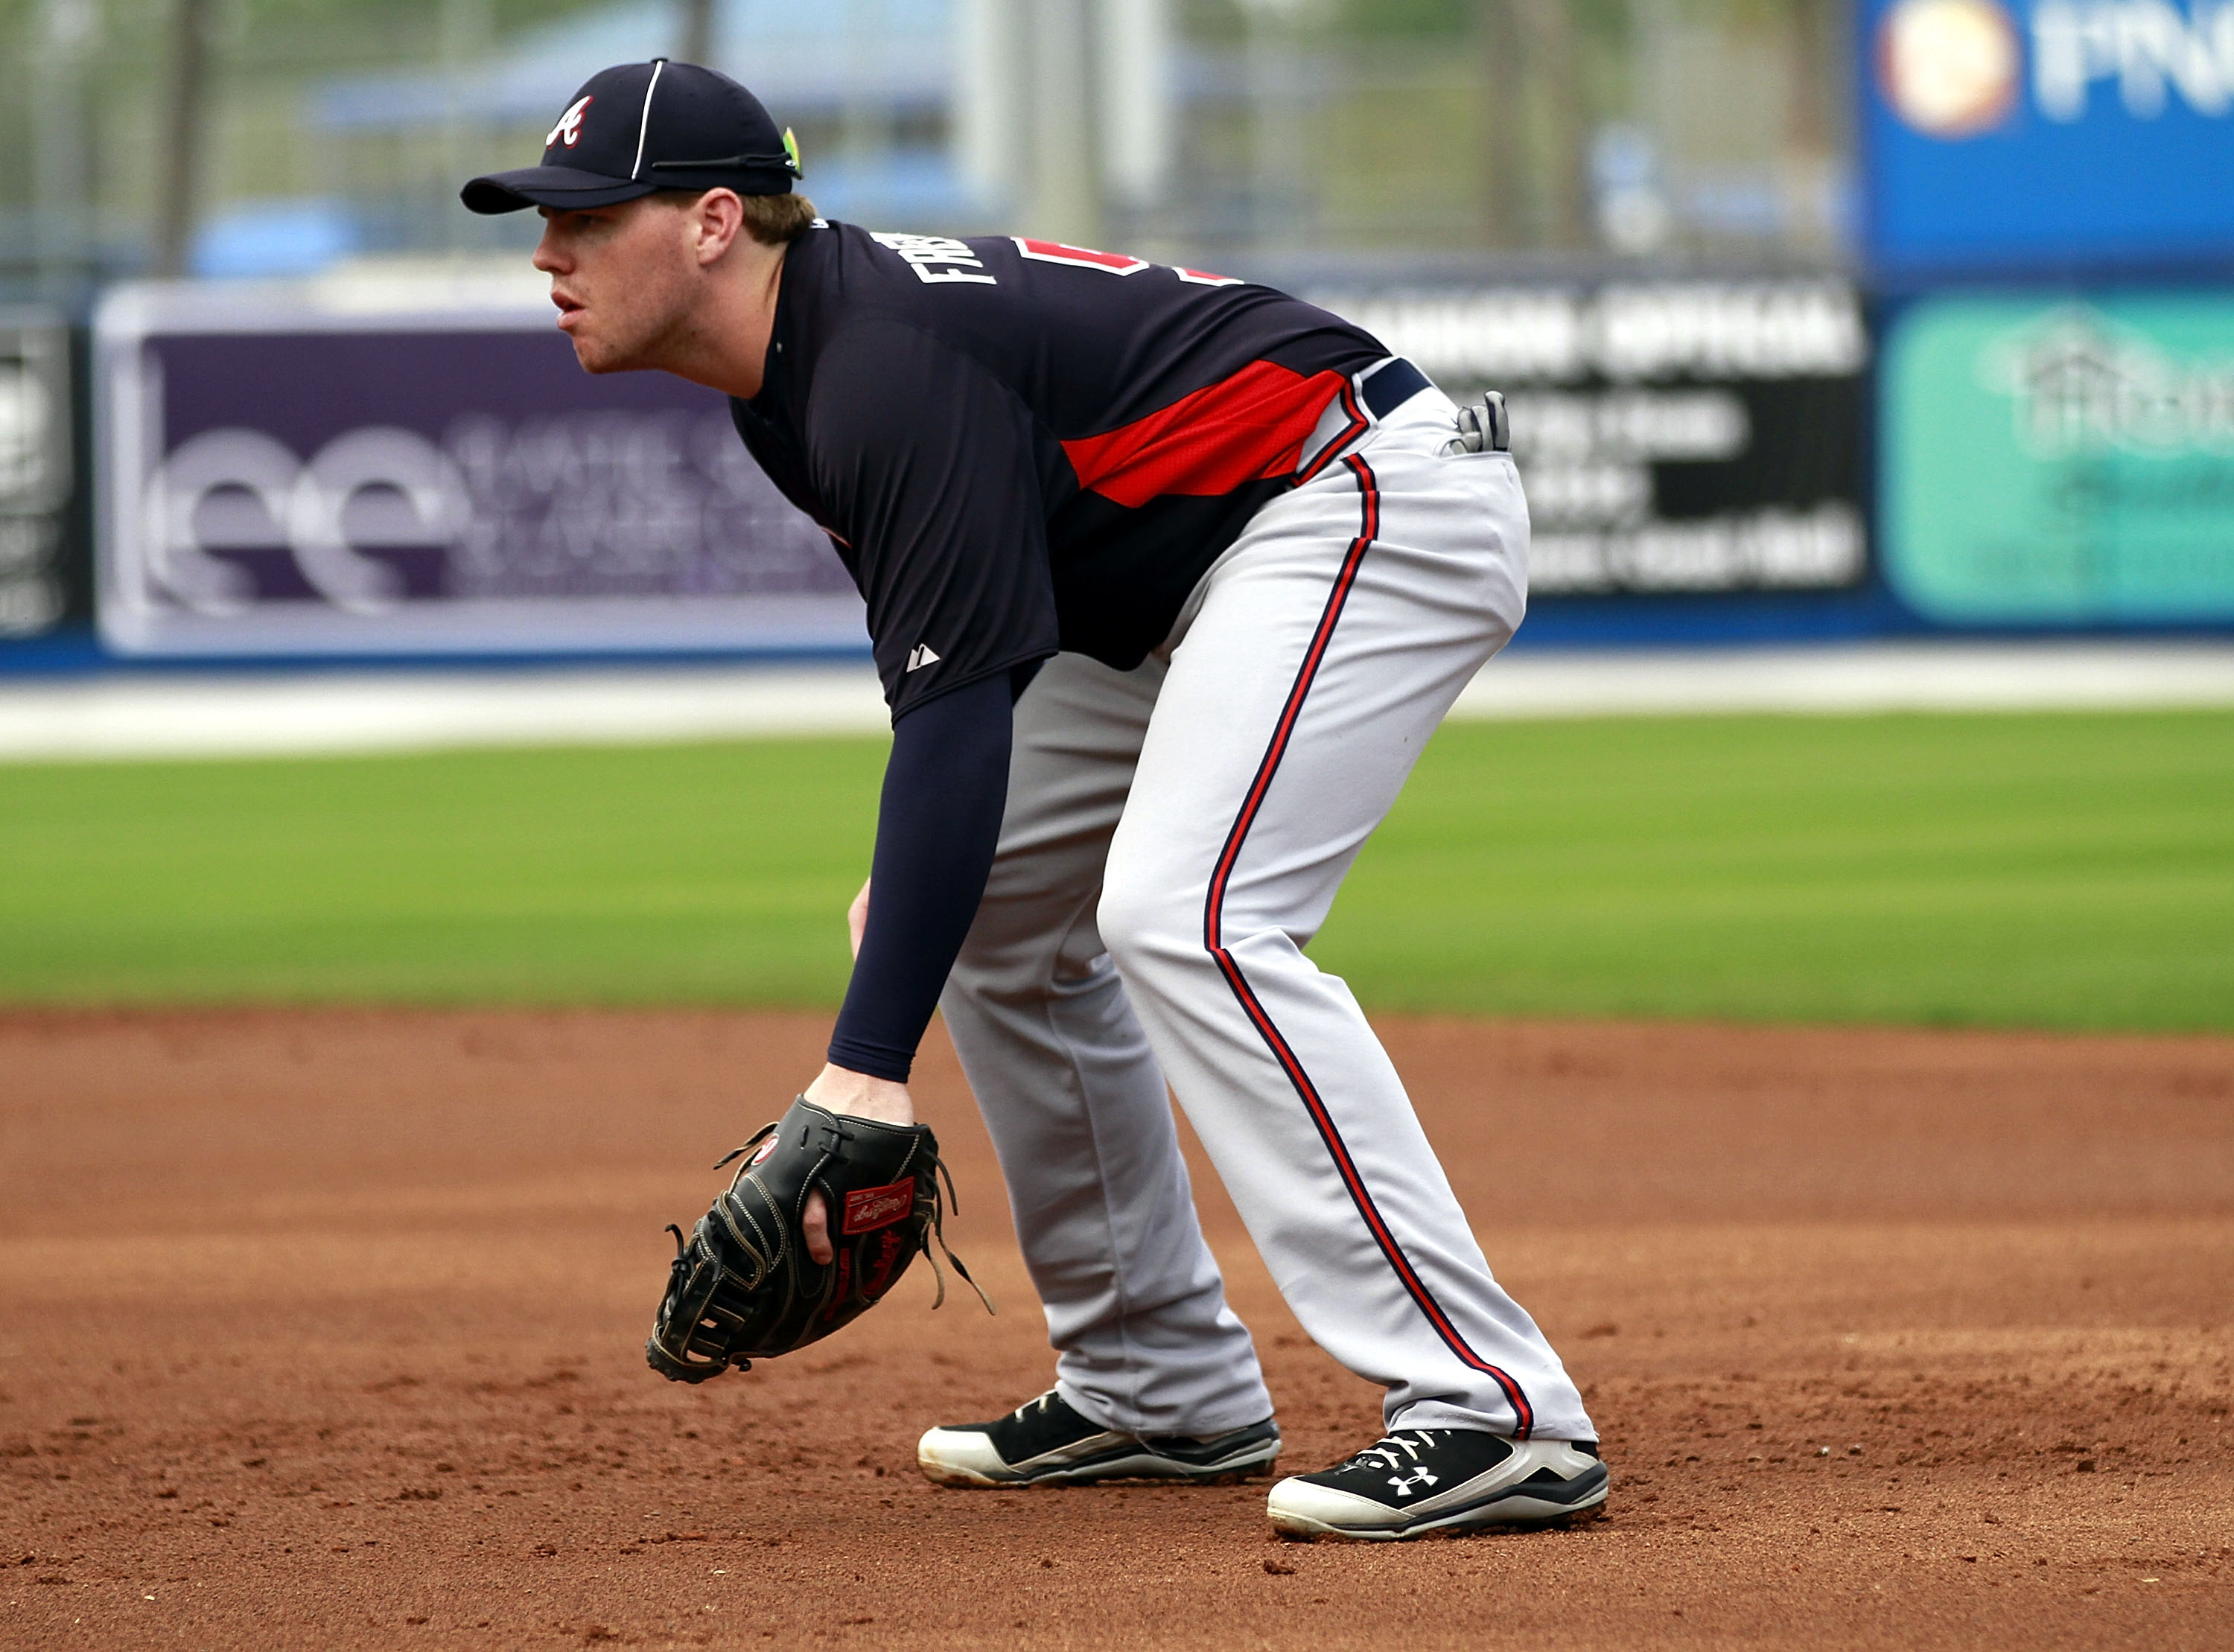 Freddie Freeman will be a strong candidate for NL Rookie of the Year in 2011